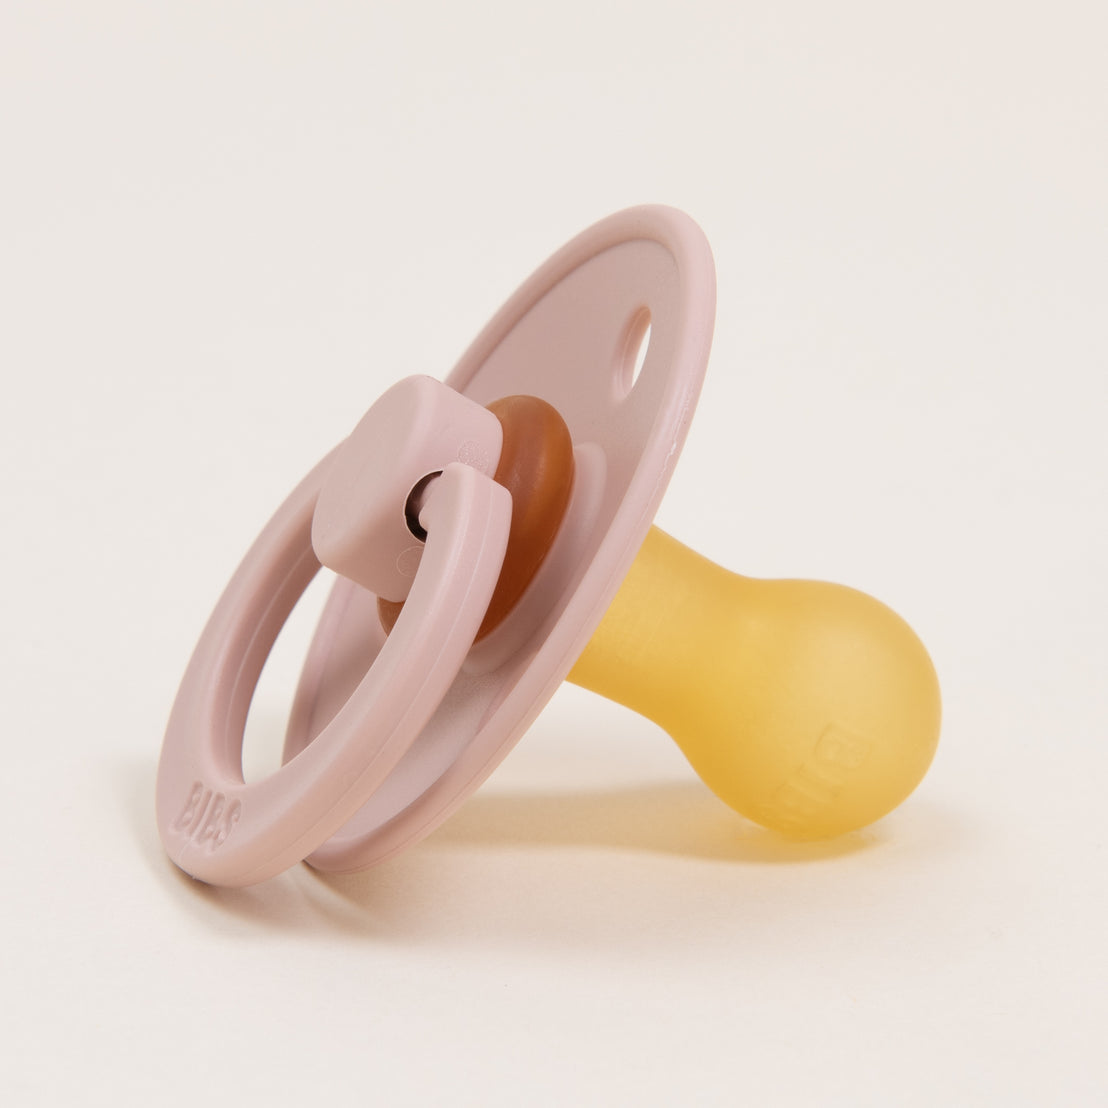 A pink Bibs Pacifier in Blush with a translucent rubber nipple and handle, isolated on a light beige background.